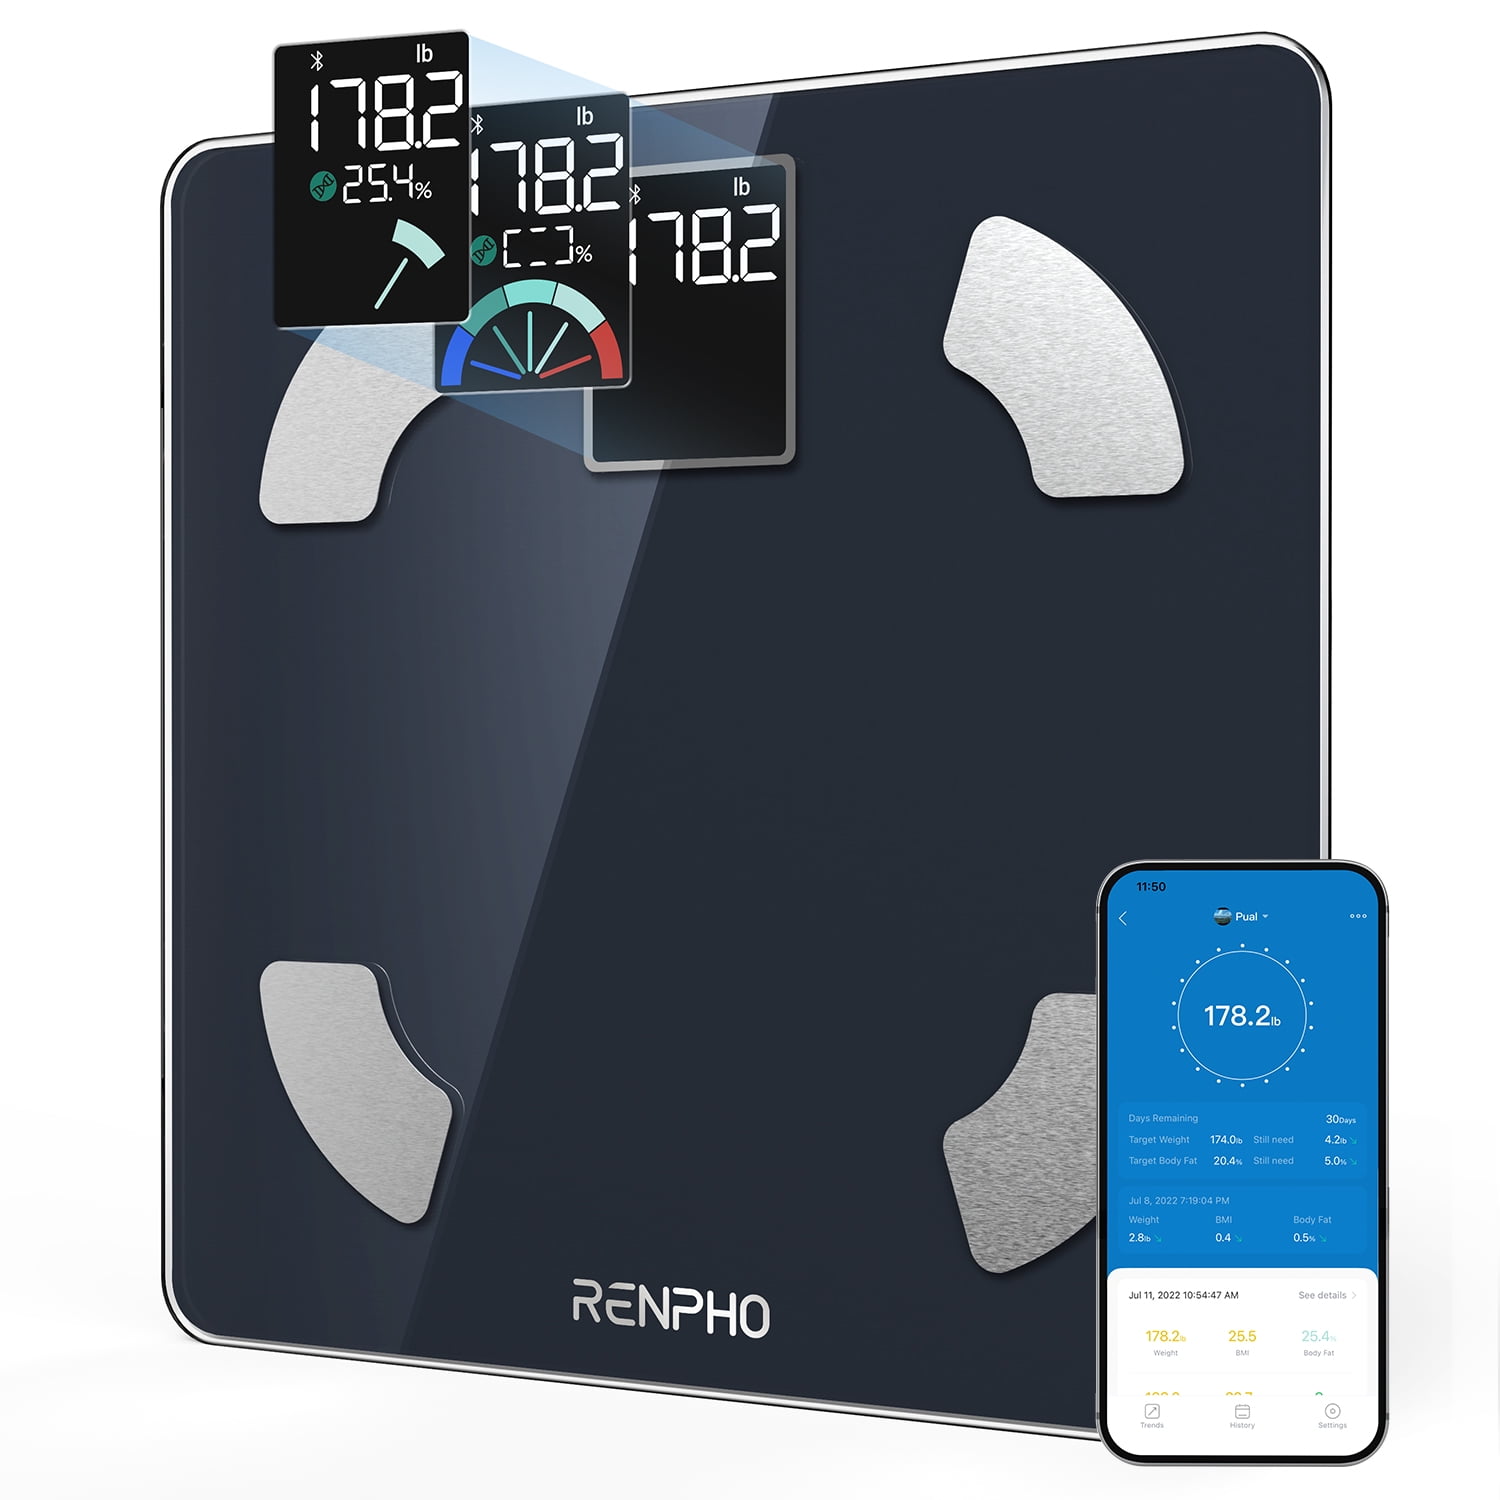 RENPHO Bluetooth Smart Scale for Body Weight with All-in-One VA Display,  400lbs